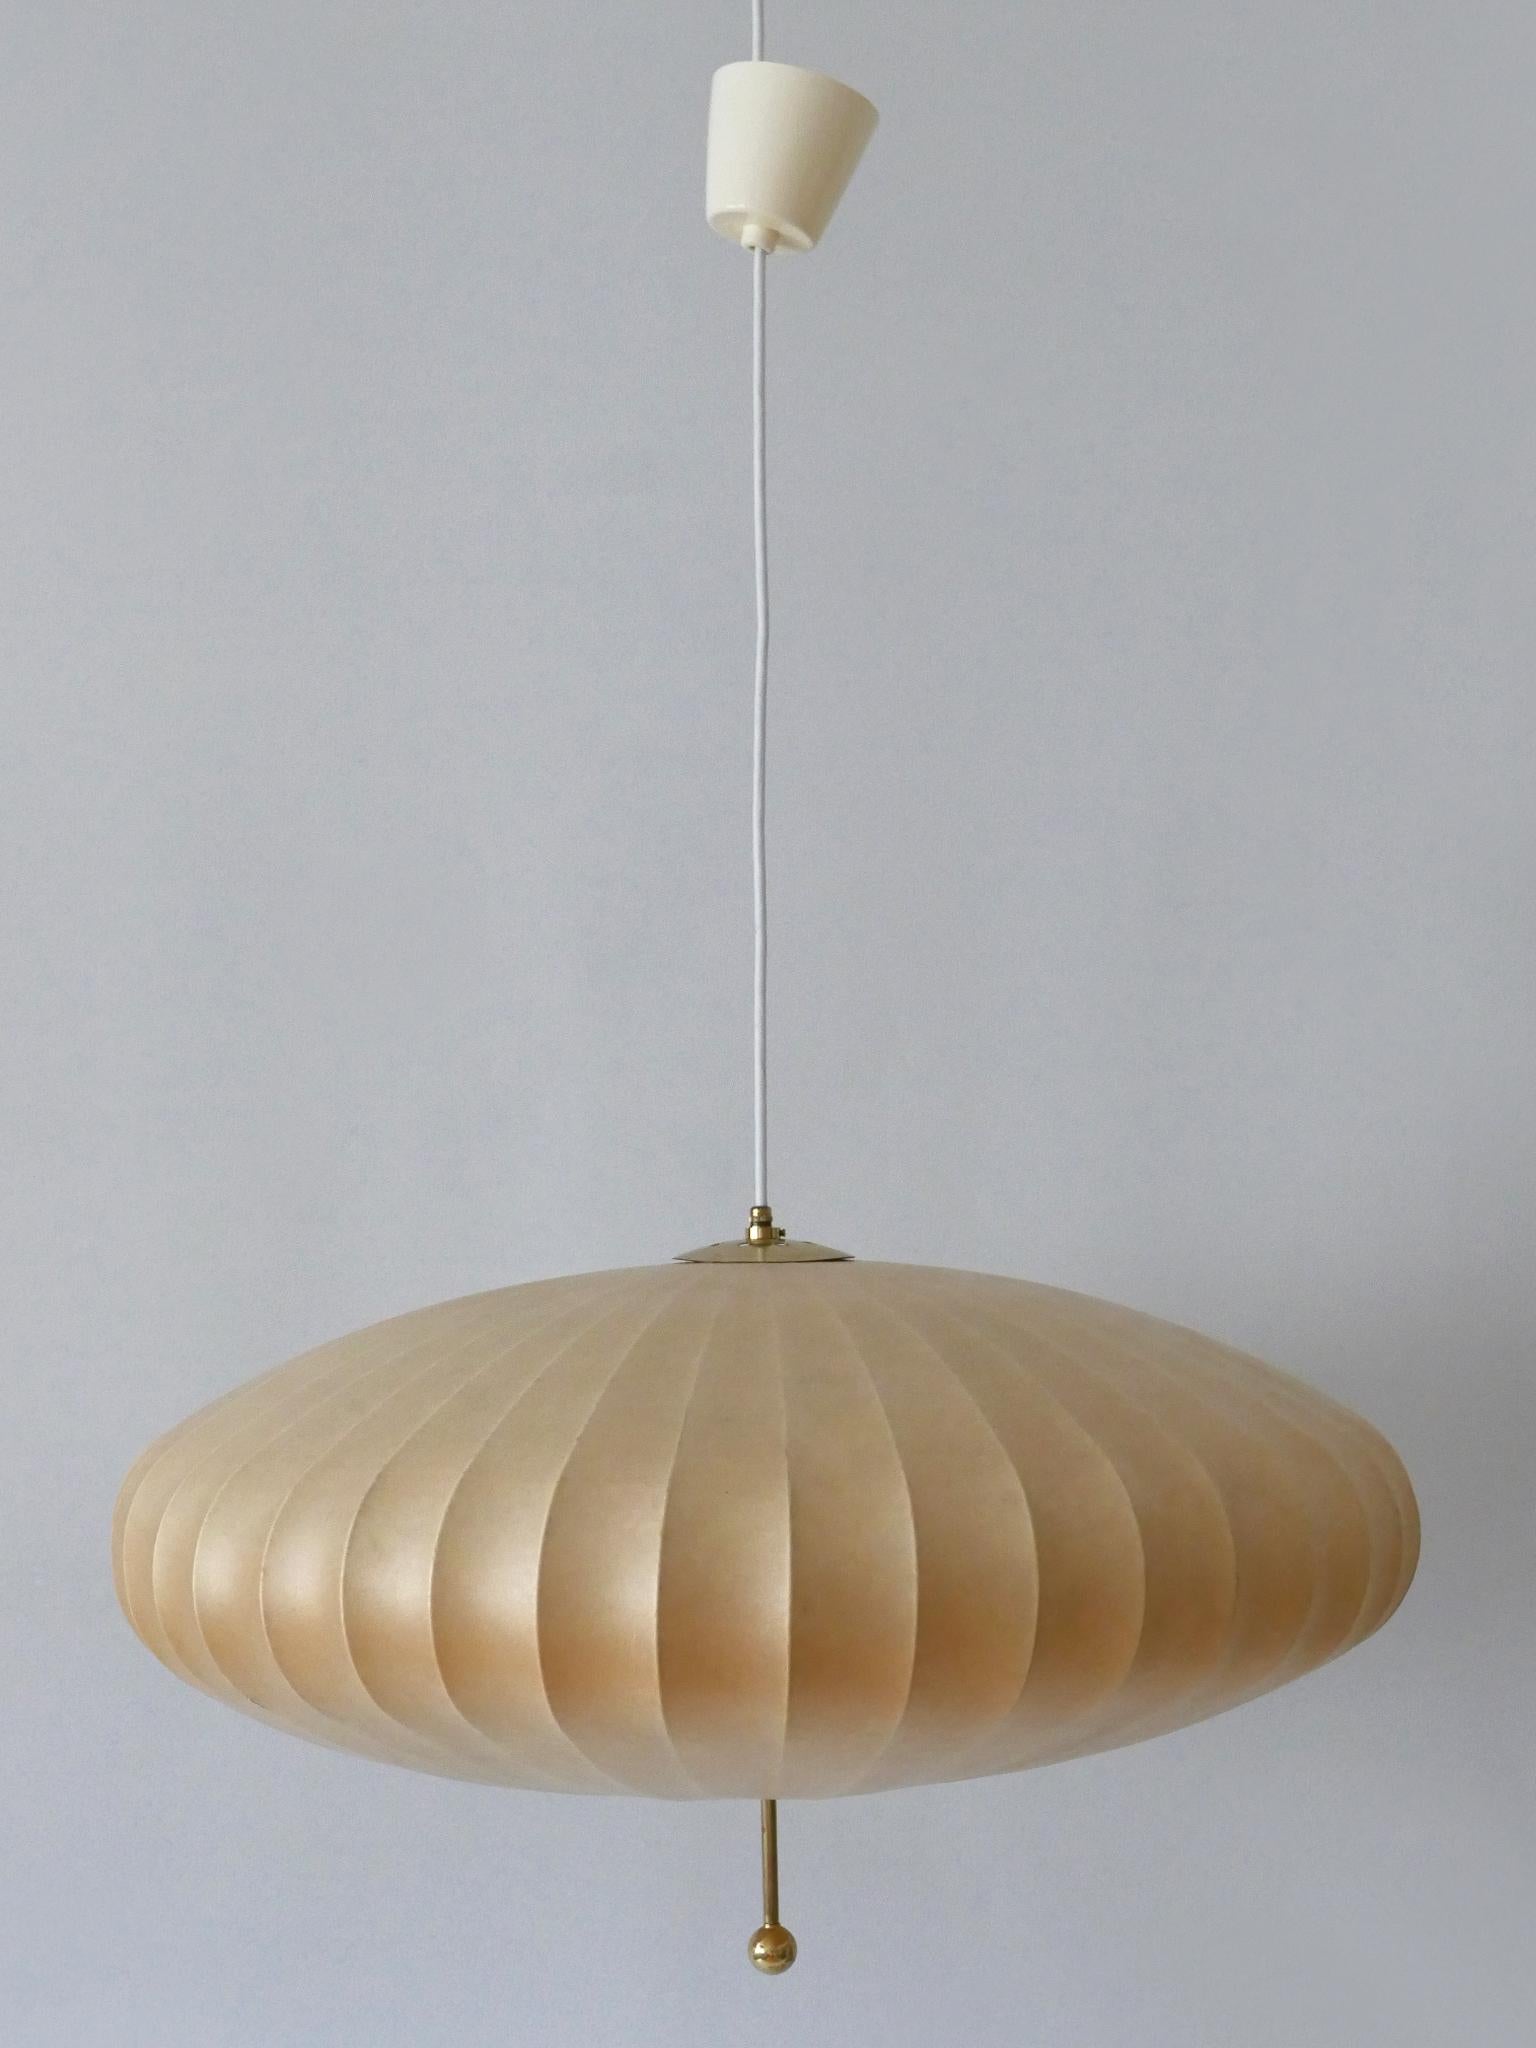 German Large Mid-Century Modern Cocoon Pendant Lamp or Hanging Light by Goldkant 1960s